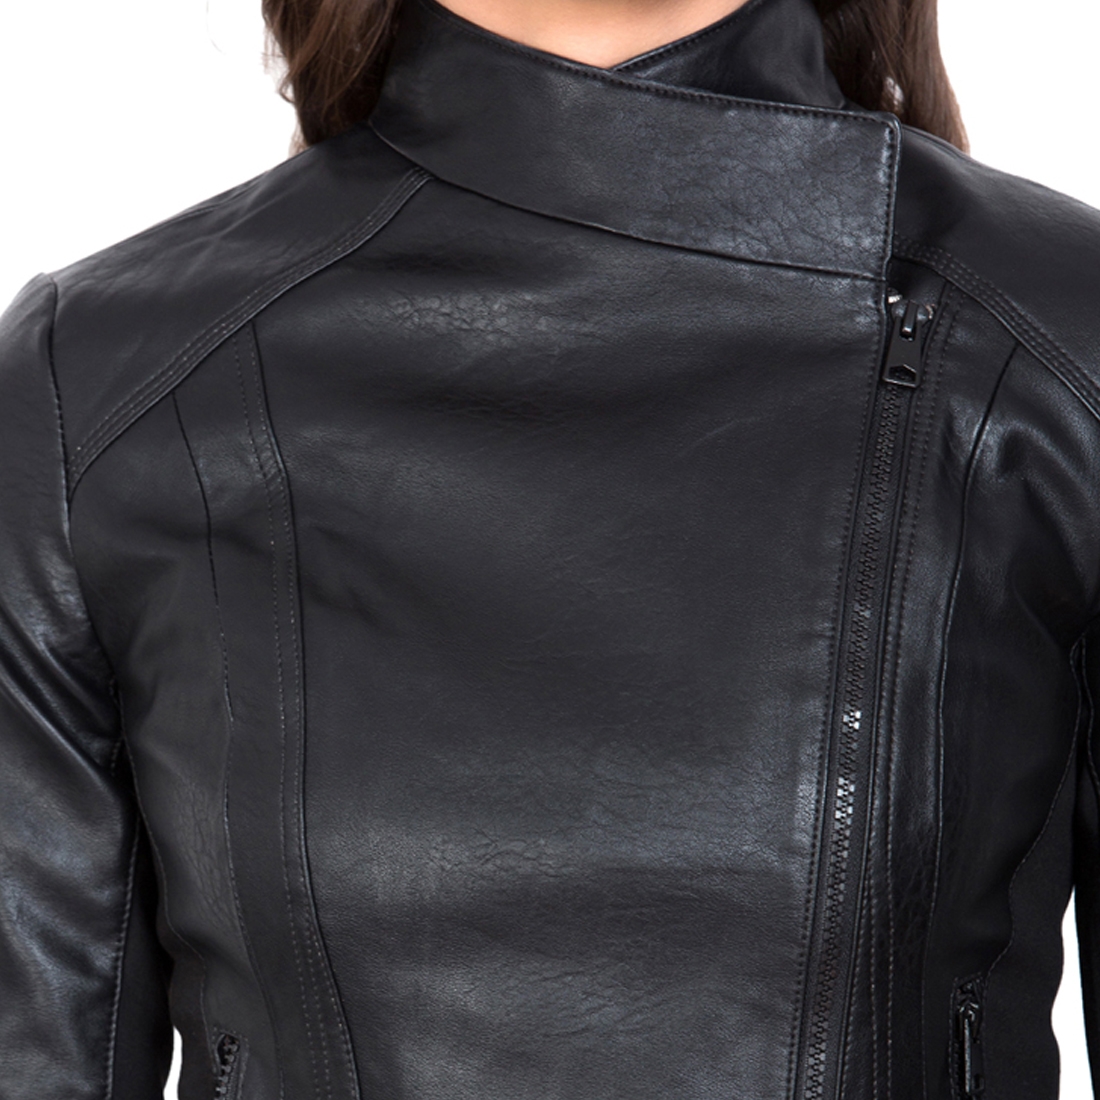 Justanned | JUSTANNED CARBON WOMEN LEATHER JACKET 5